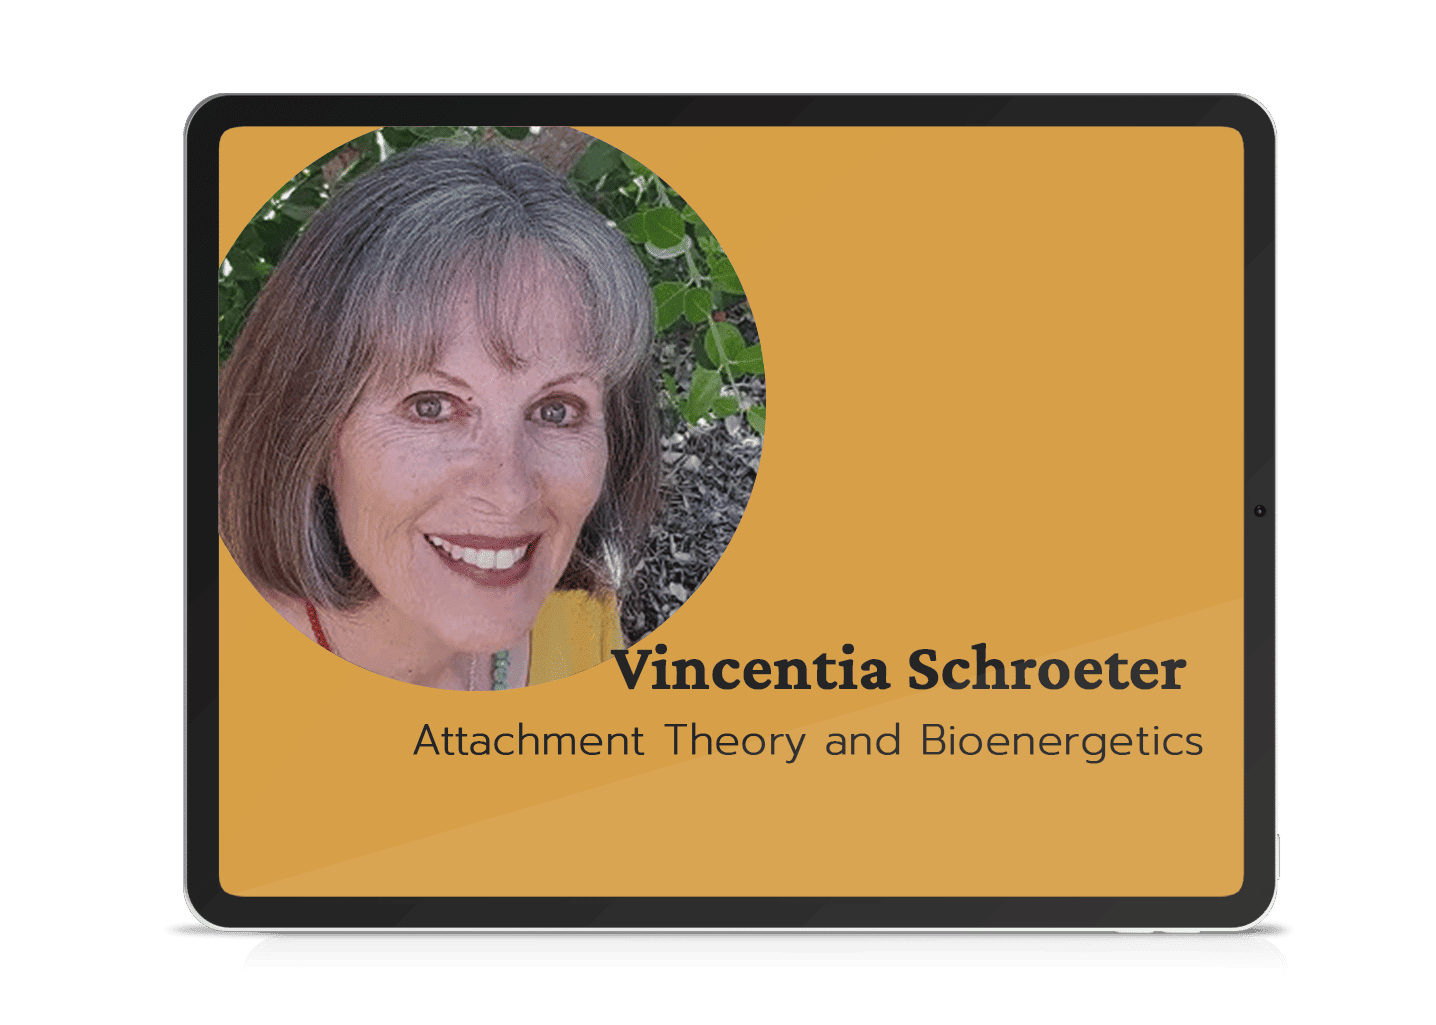 Attachment Theory and Bioenergetics with Vin Schroeter